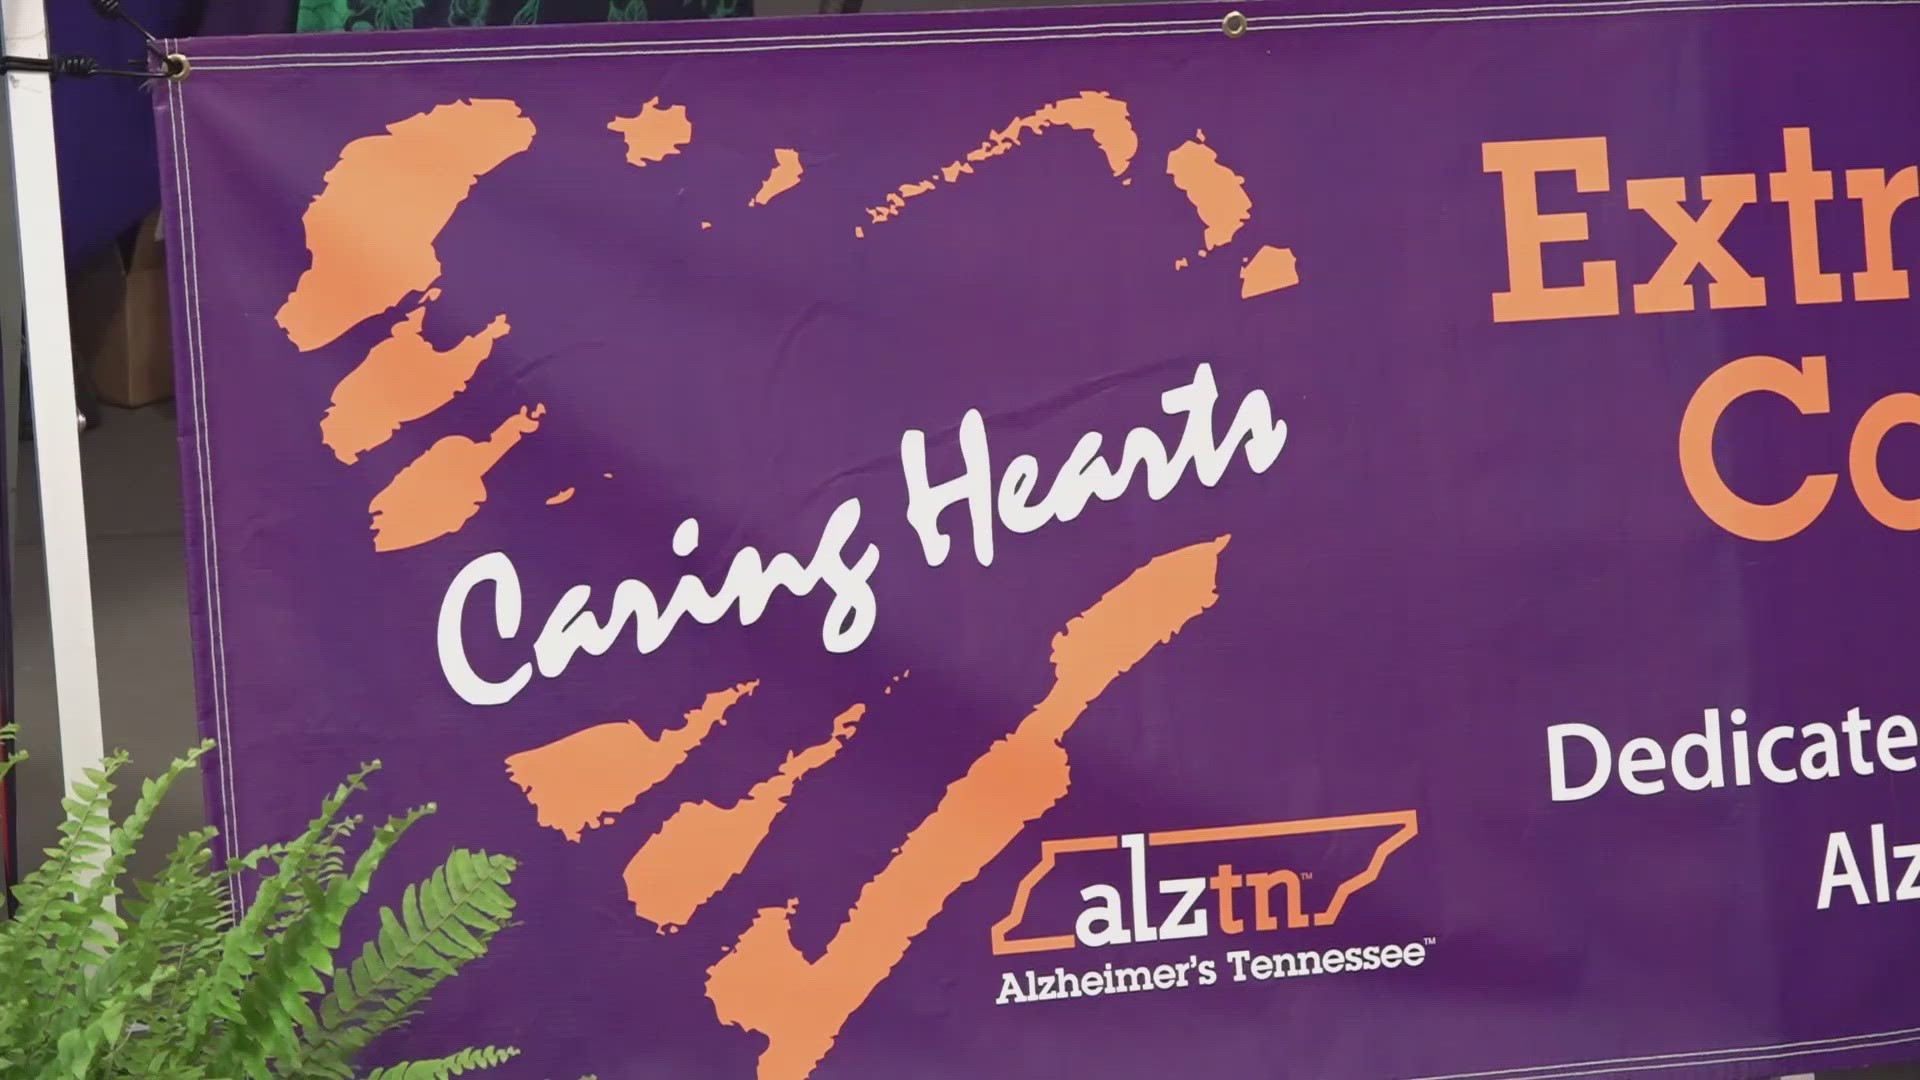 Each year, Alzheimer's Tennessee reaches out to area facilities and asks them to nominate a staff member who provided outstanding care.